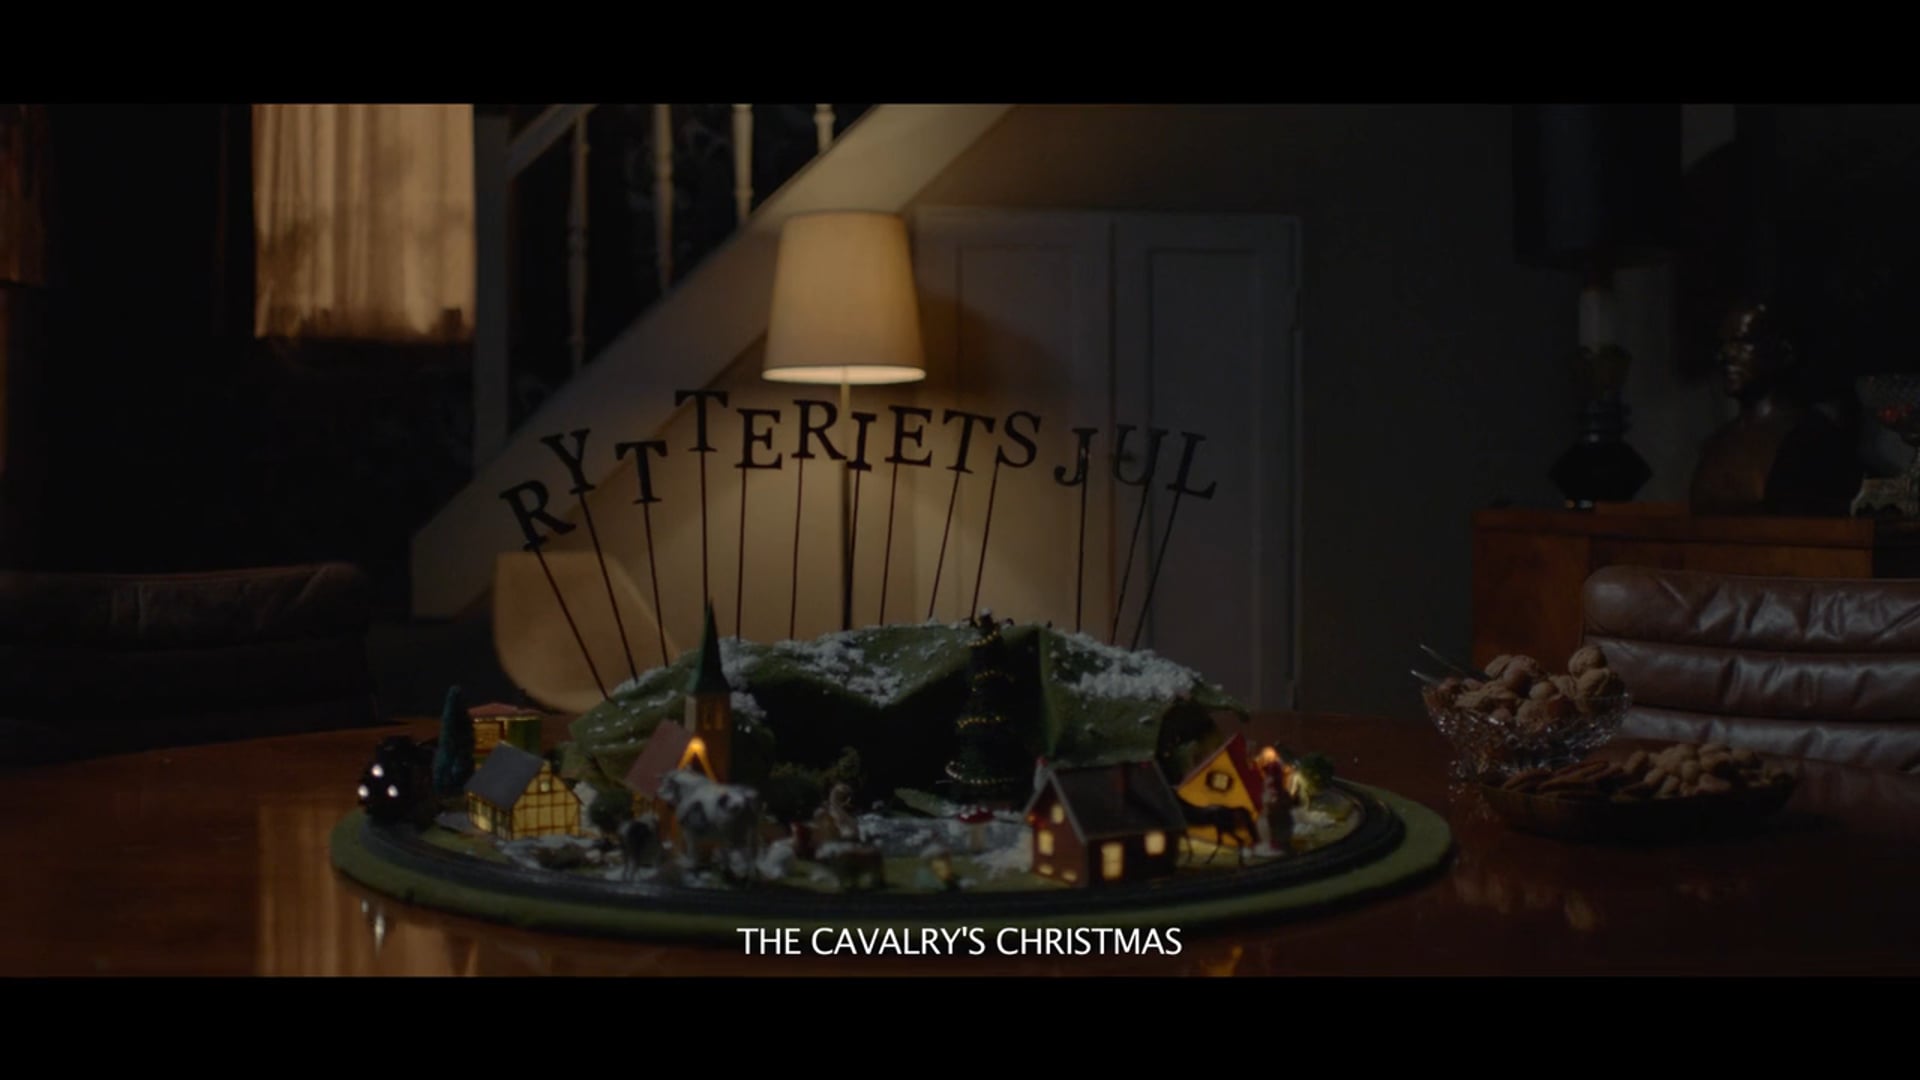 RYTTERIETS JUL (The Cavalry's Christmas) - Episode II